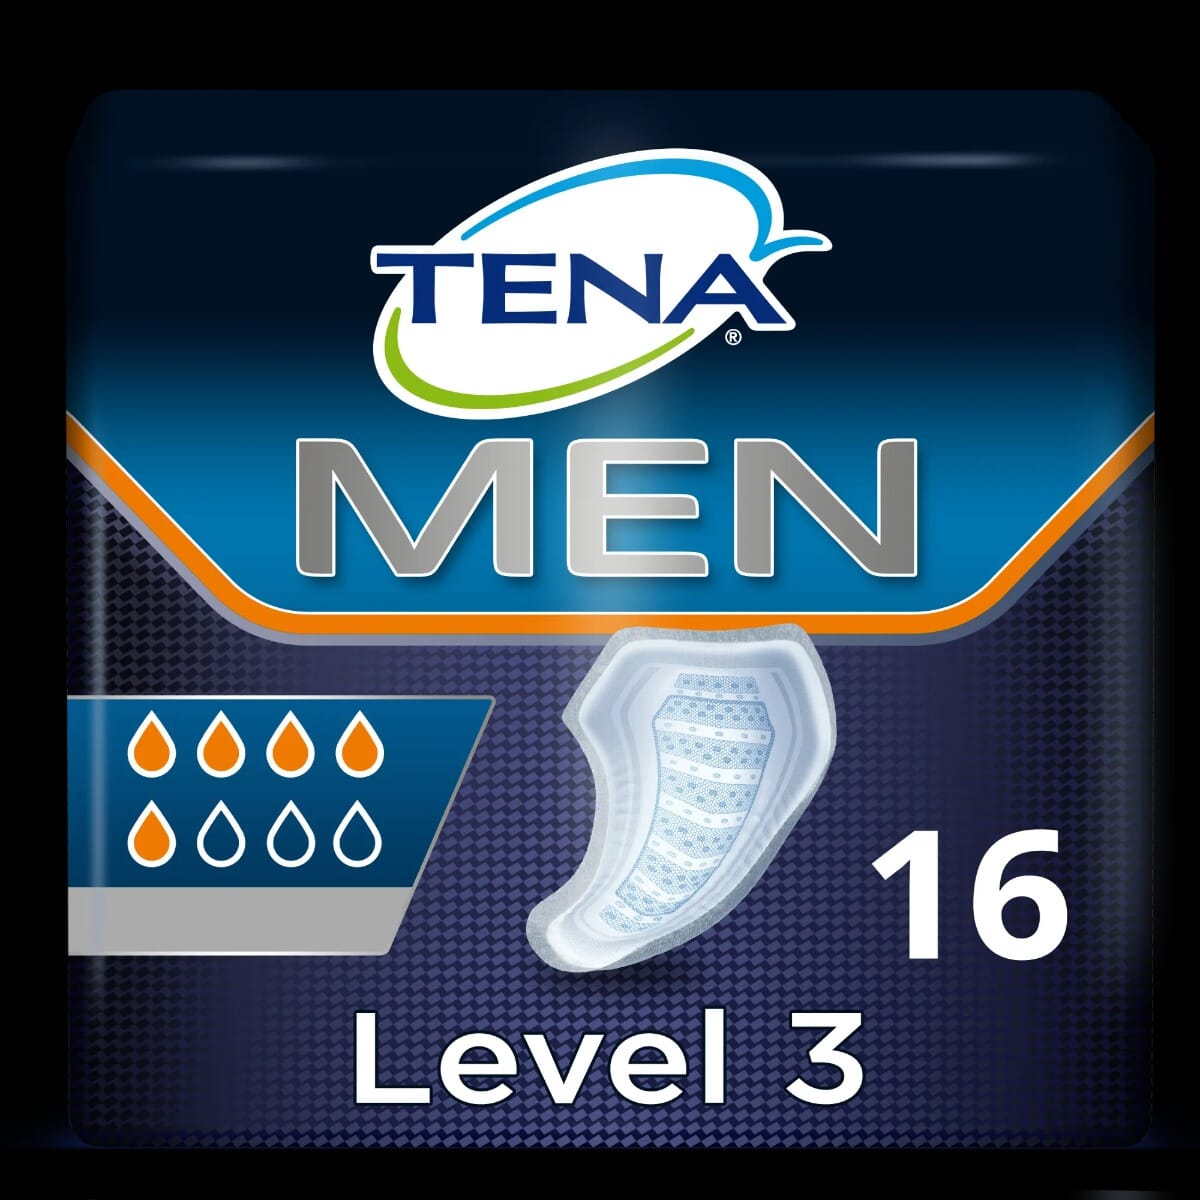 Tena Men Level 3 Incontinence Pads 3 Packs of 16 (48 Total) Absorbent  Protector 7322540463620